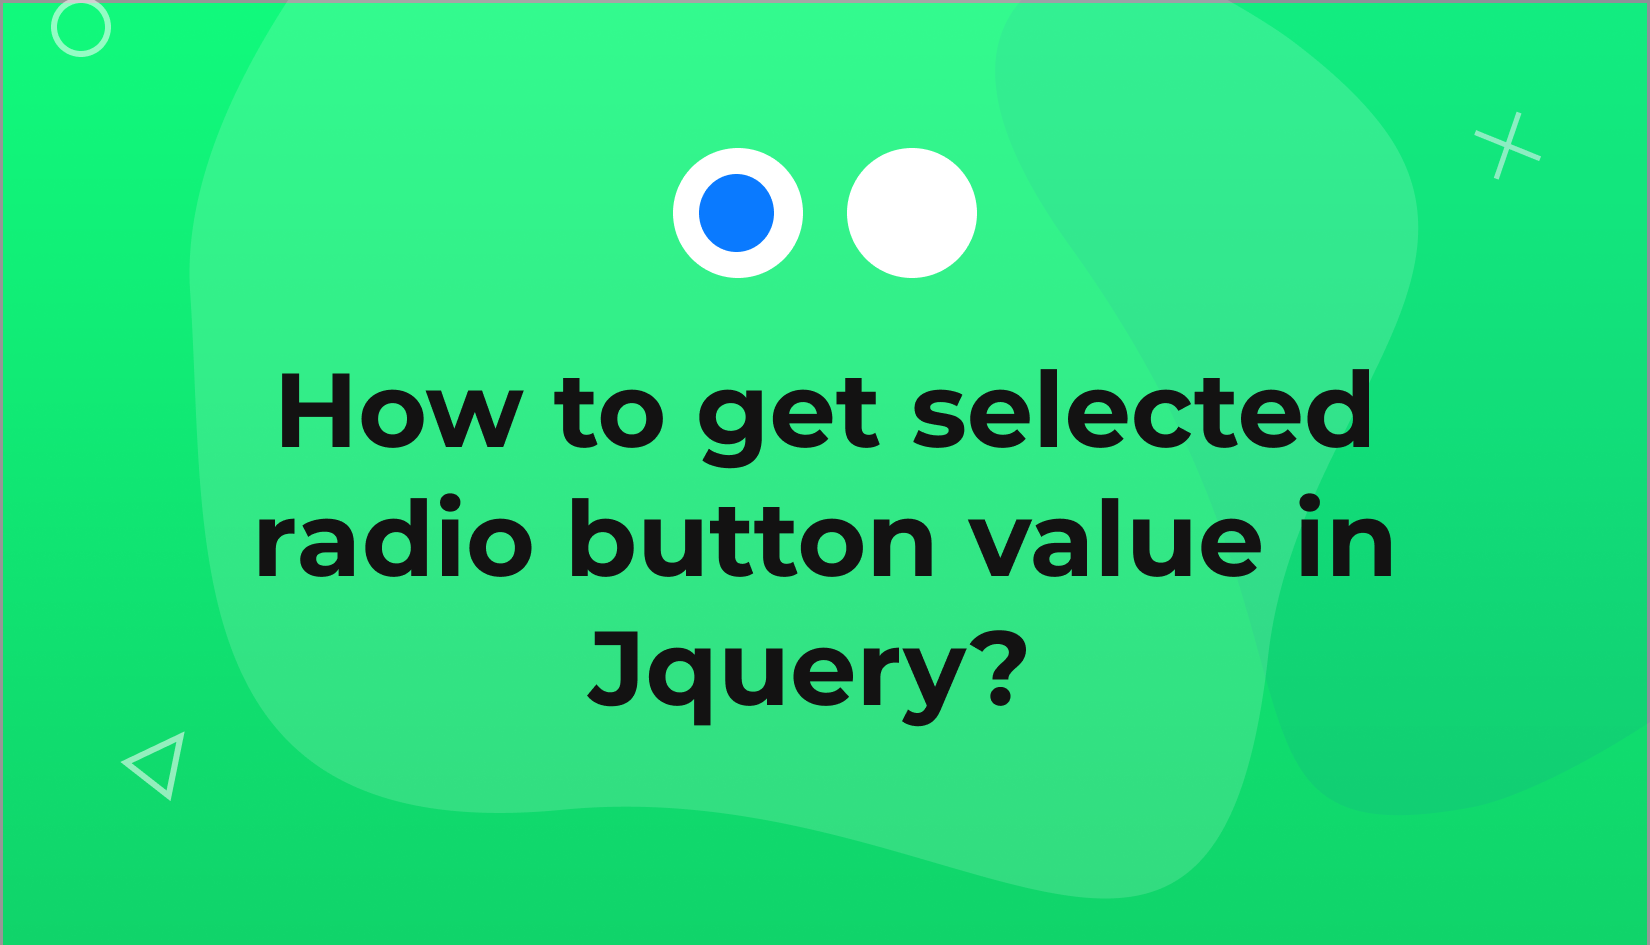 How to Get Selected Radio Button Value in Jquery?